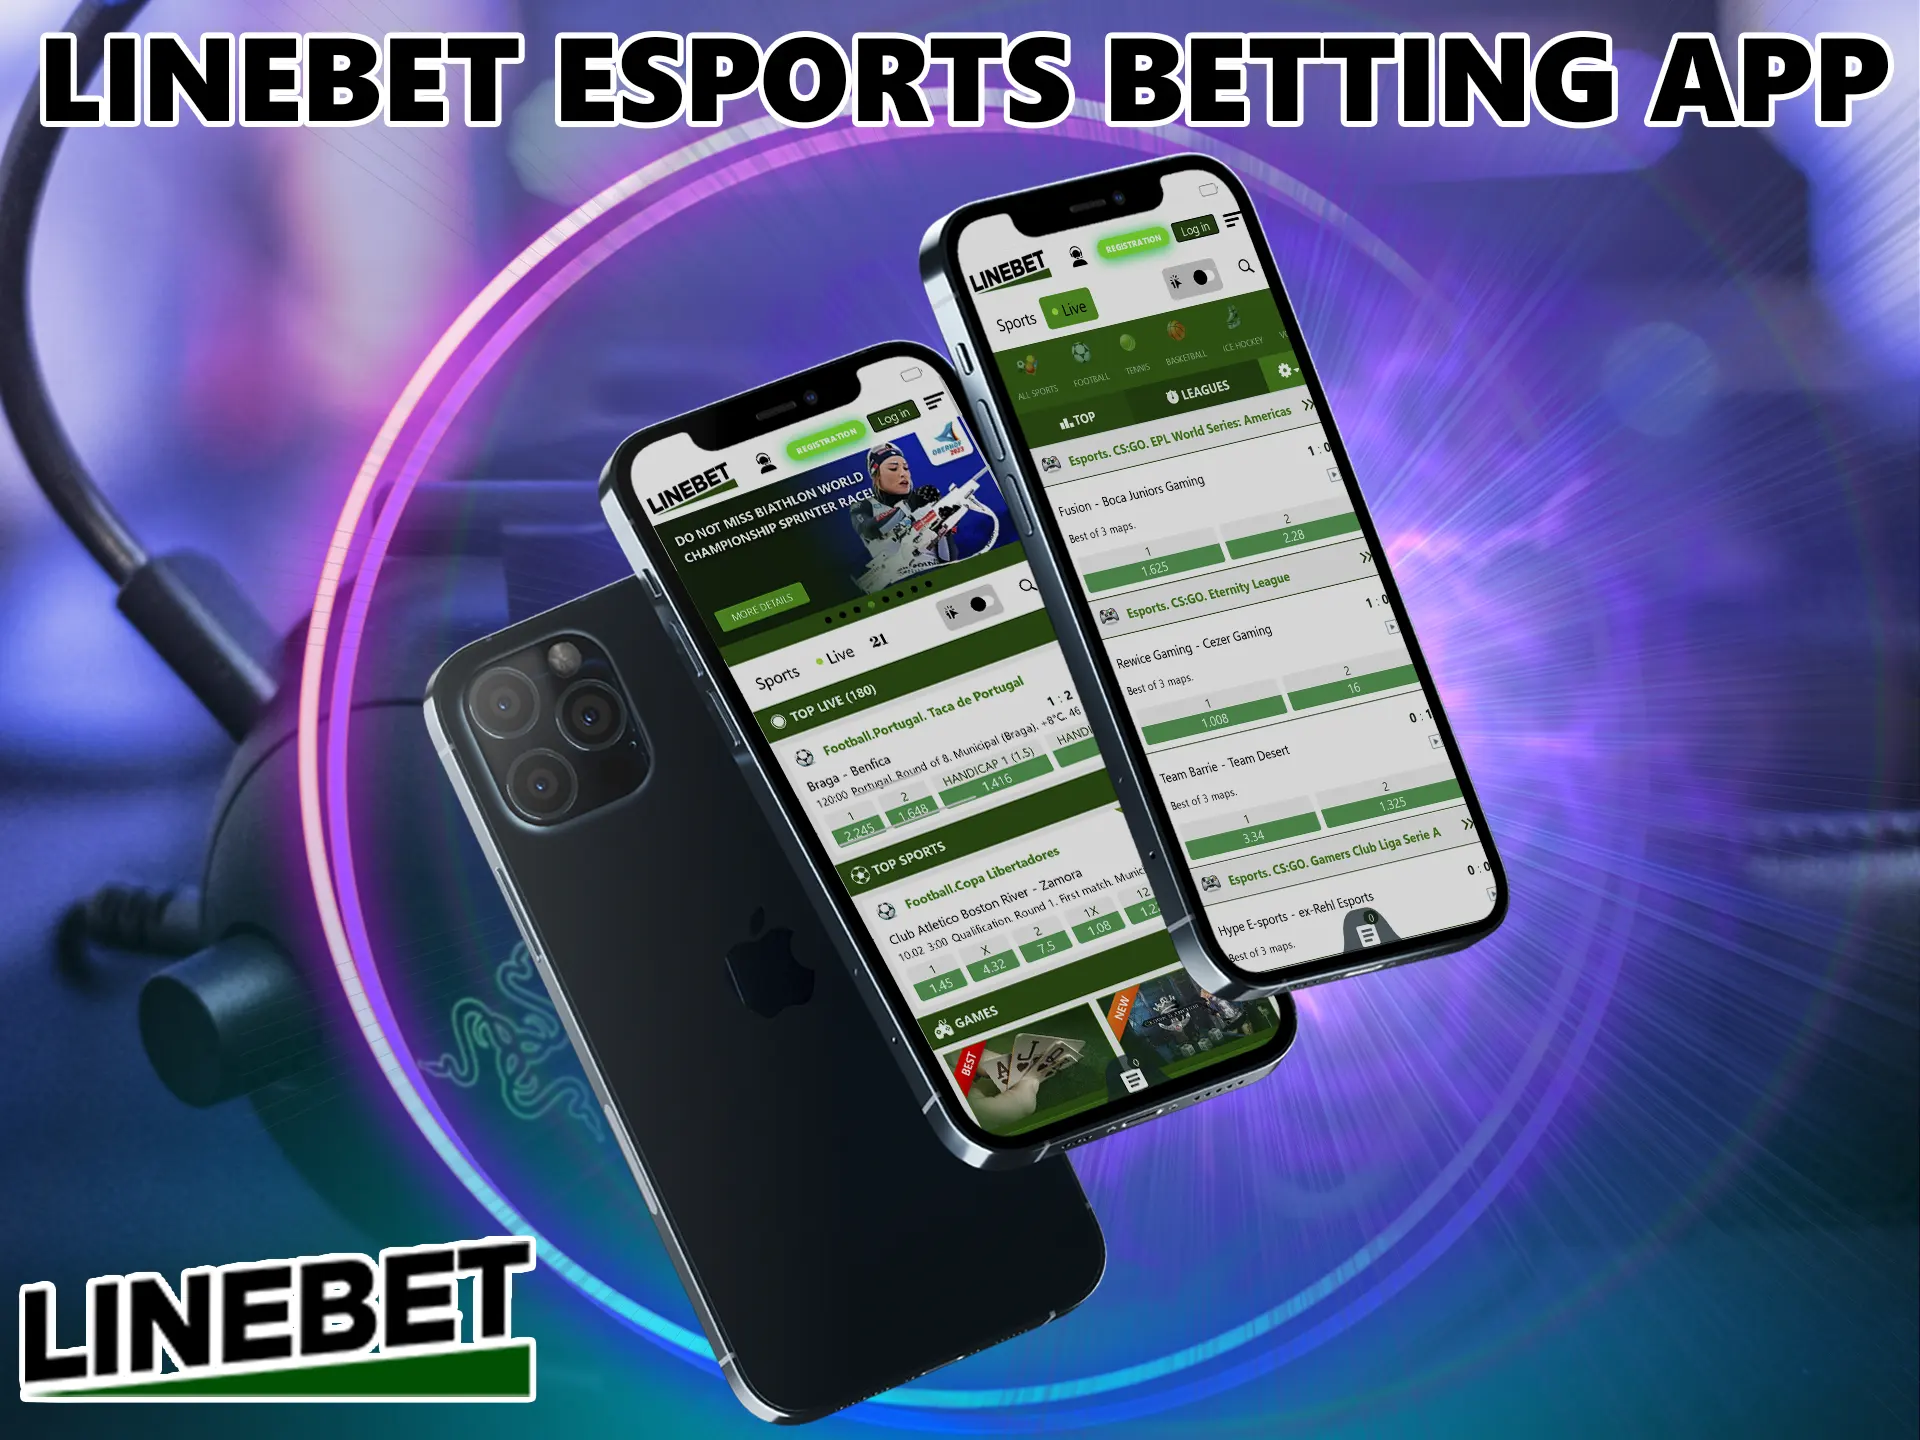 Thanks to modern technology, customers from India have the opportunity to bet wherever they want on Linebet.